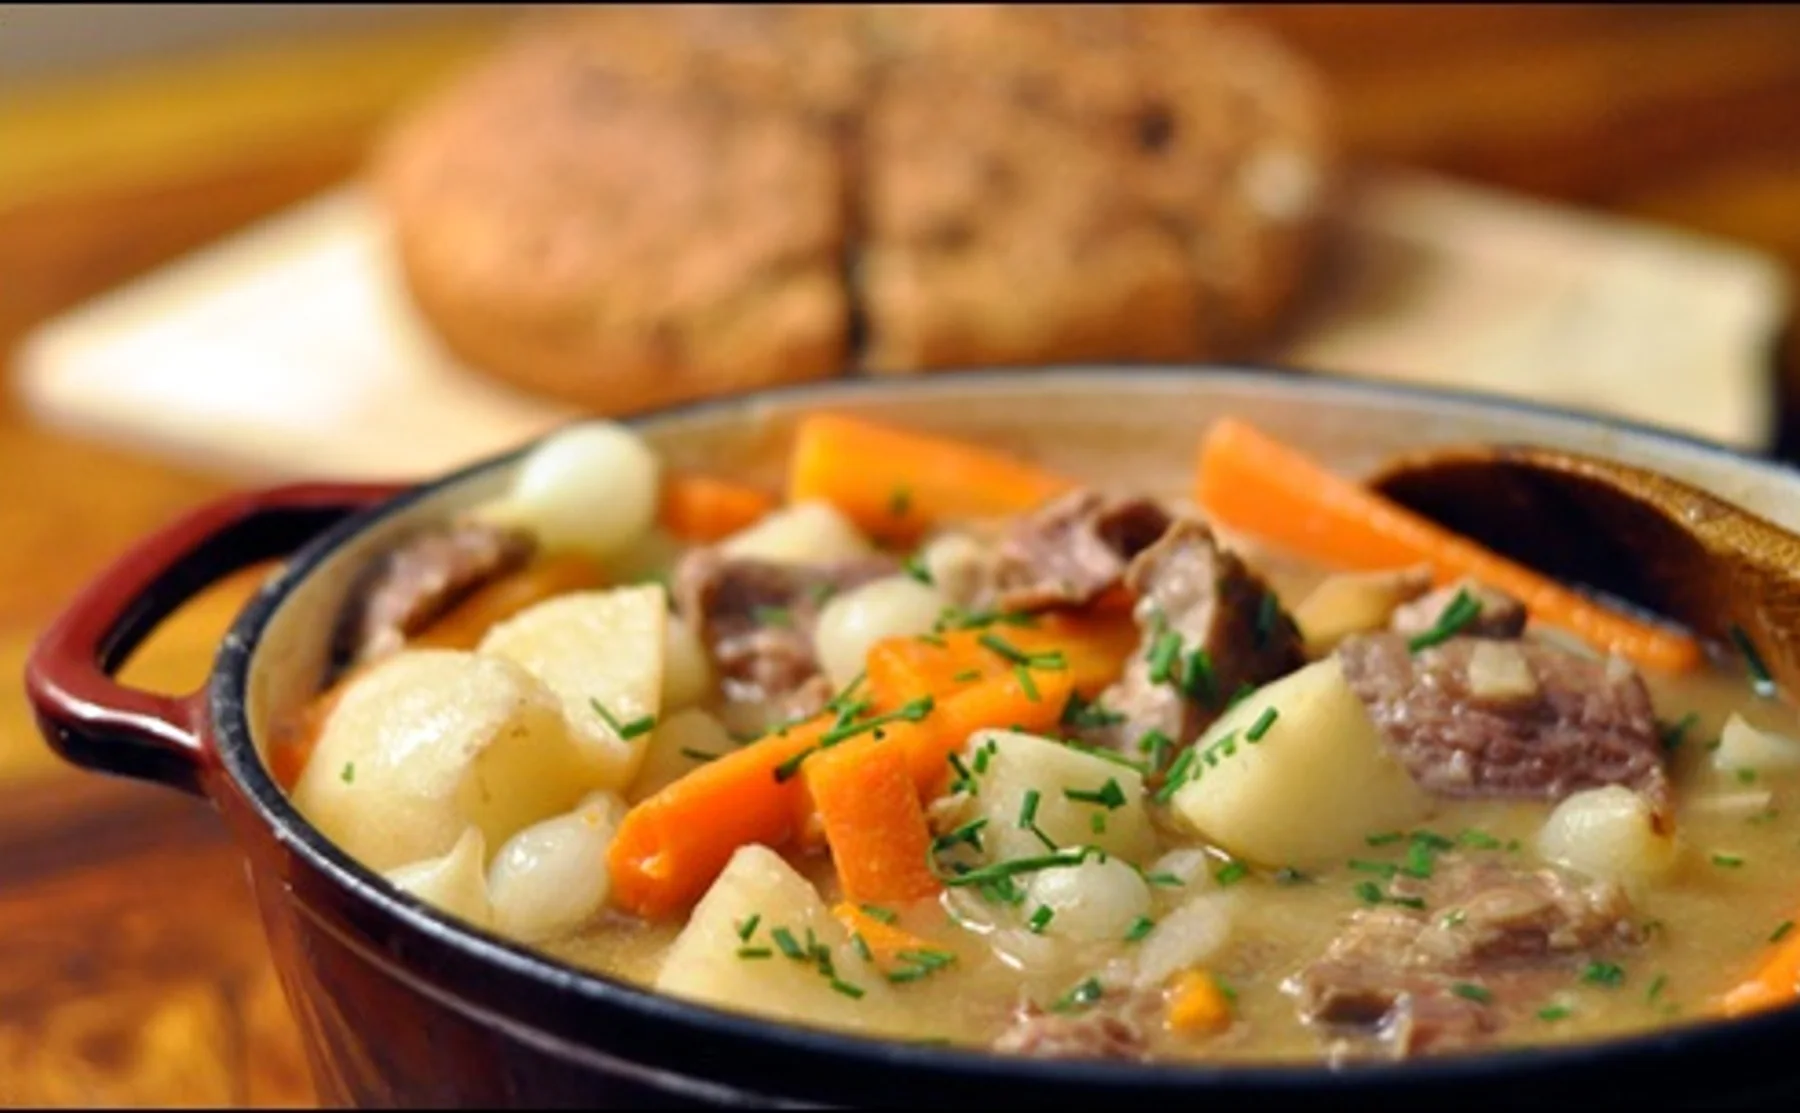 Let's celebrate St Patrick's Day by cooking Irish food! - 384017